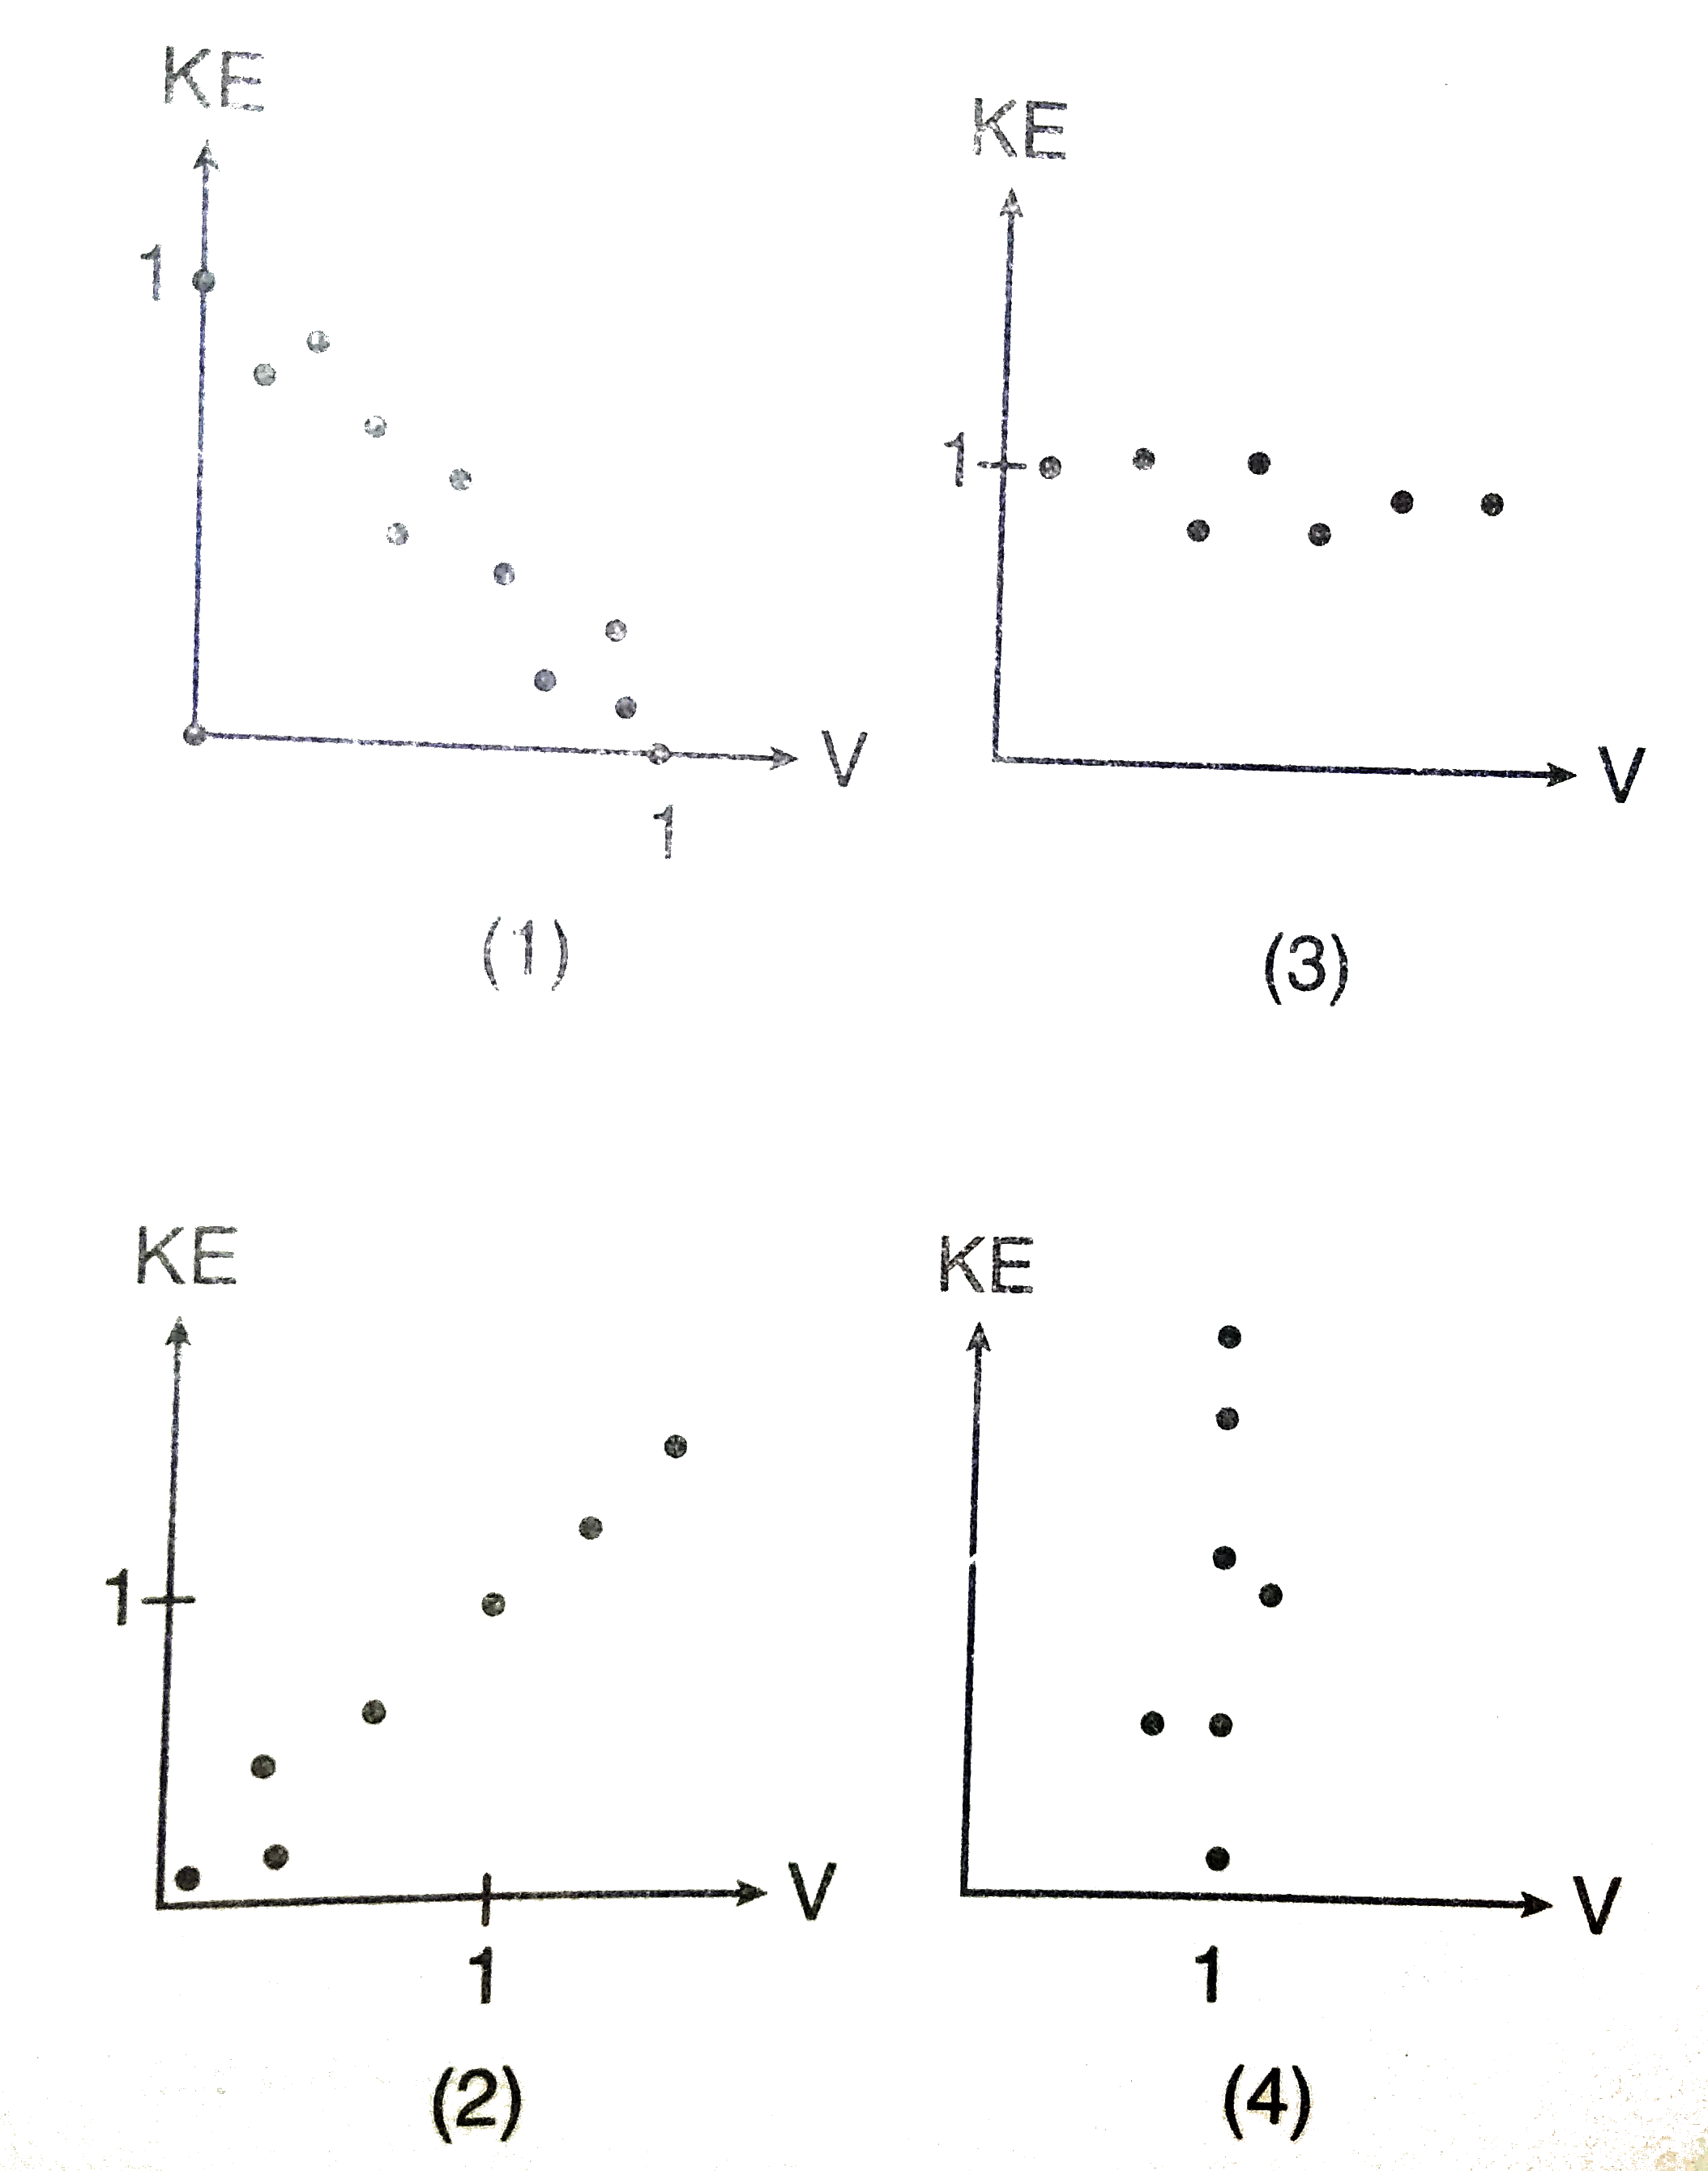 In the physics lab, a student determined the kinetic energy, KE, of an object at various velocities, V, and found a strong positive association between KE and V. Which of the above scatterplots show this relationship?